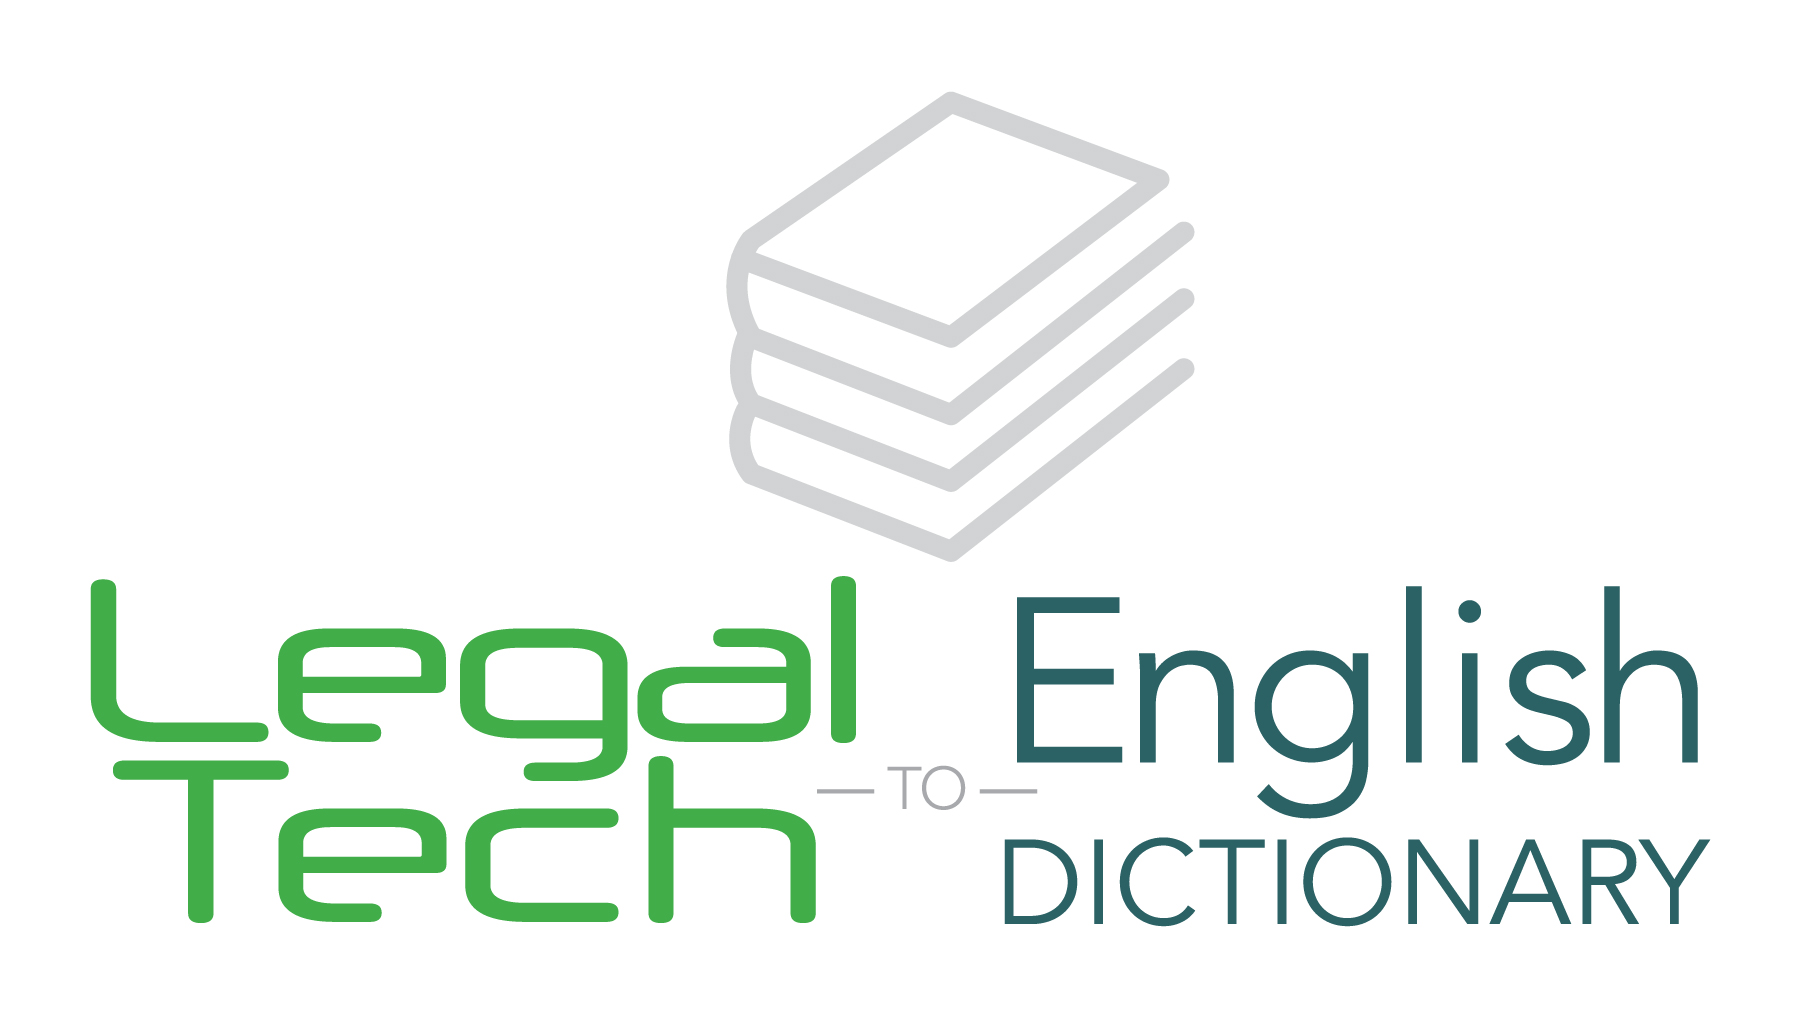 The Legal Tech-To-English Dictionary Is Back!